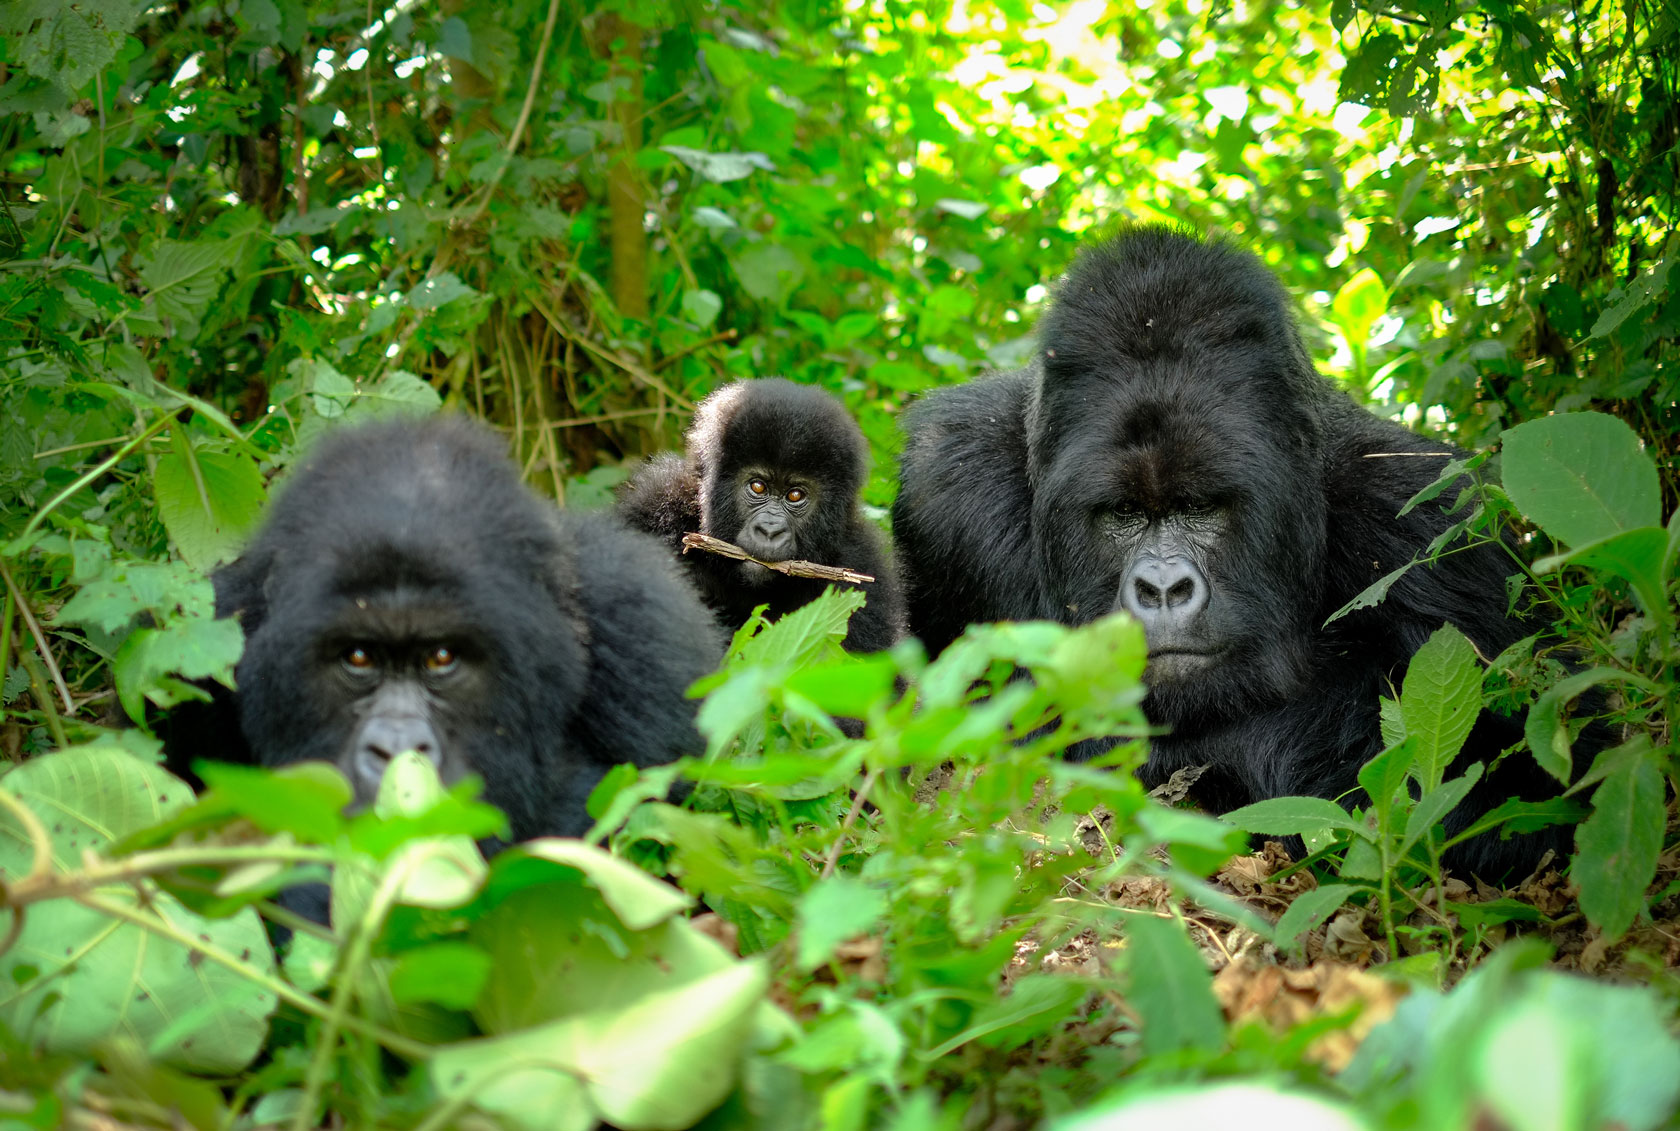 Family of mountain gorillas with a baby gorilla and a silverback in Rwanda.